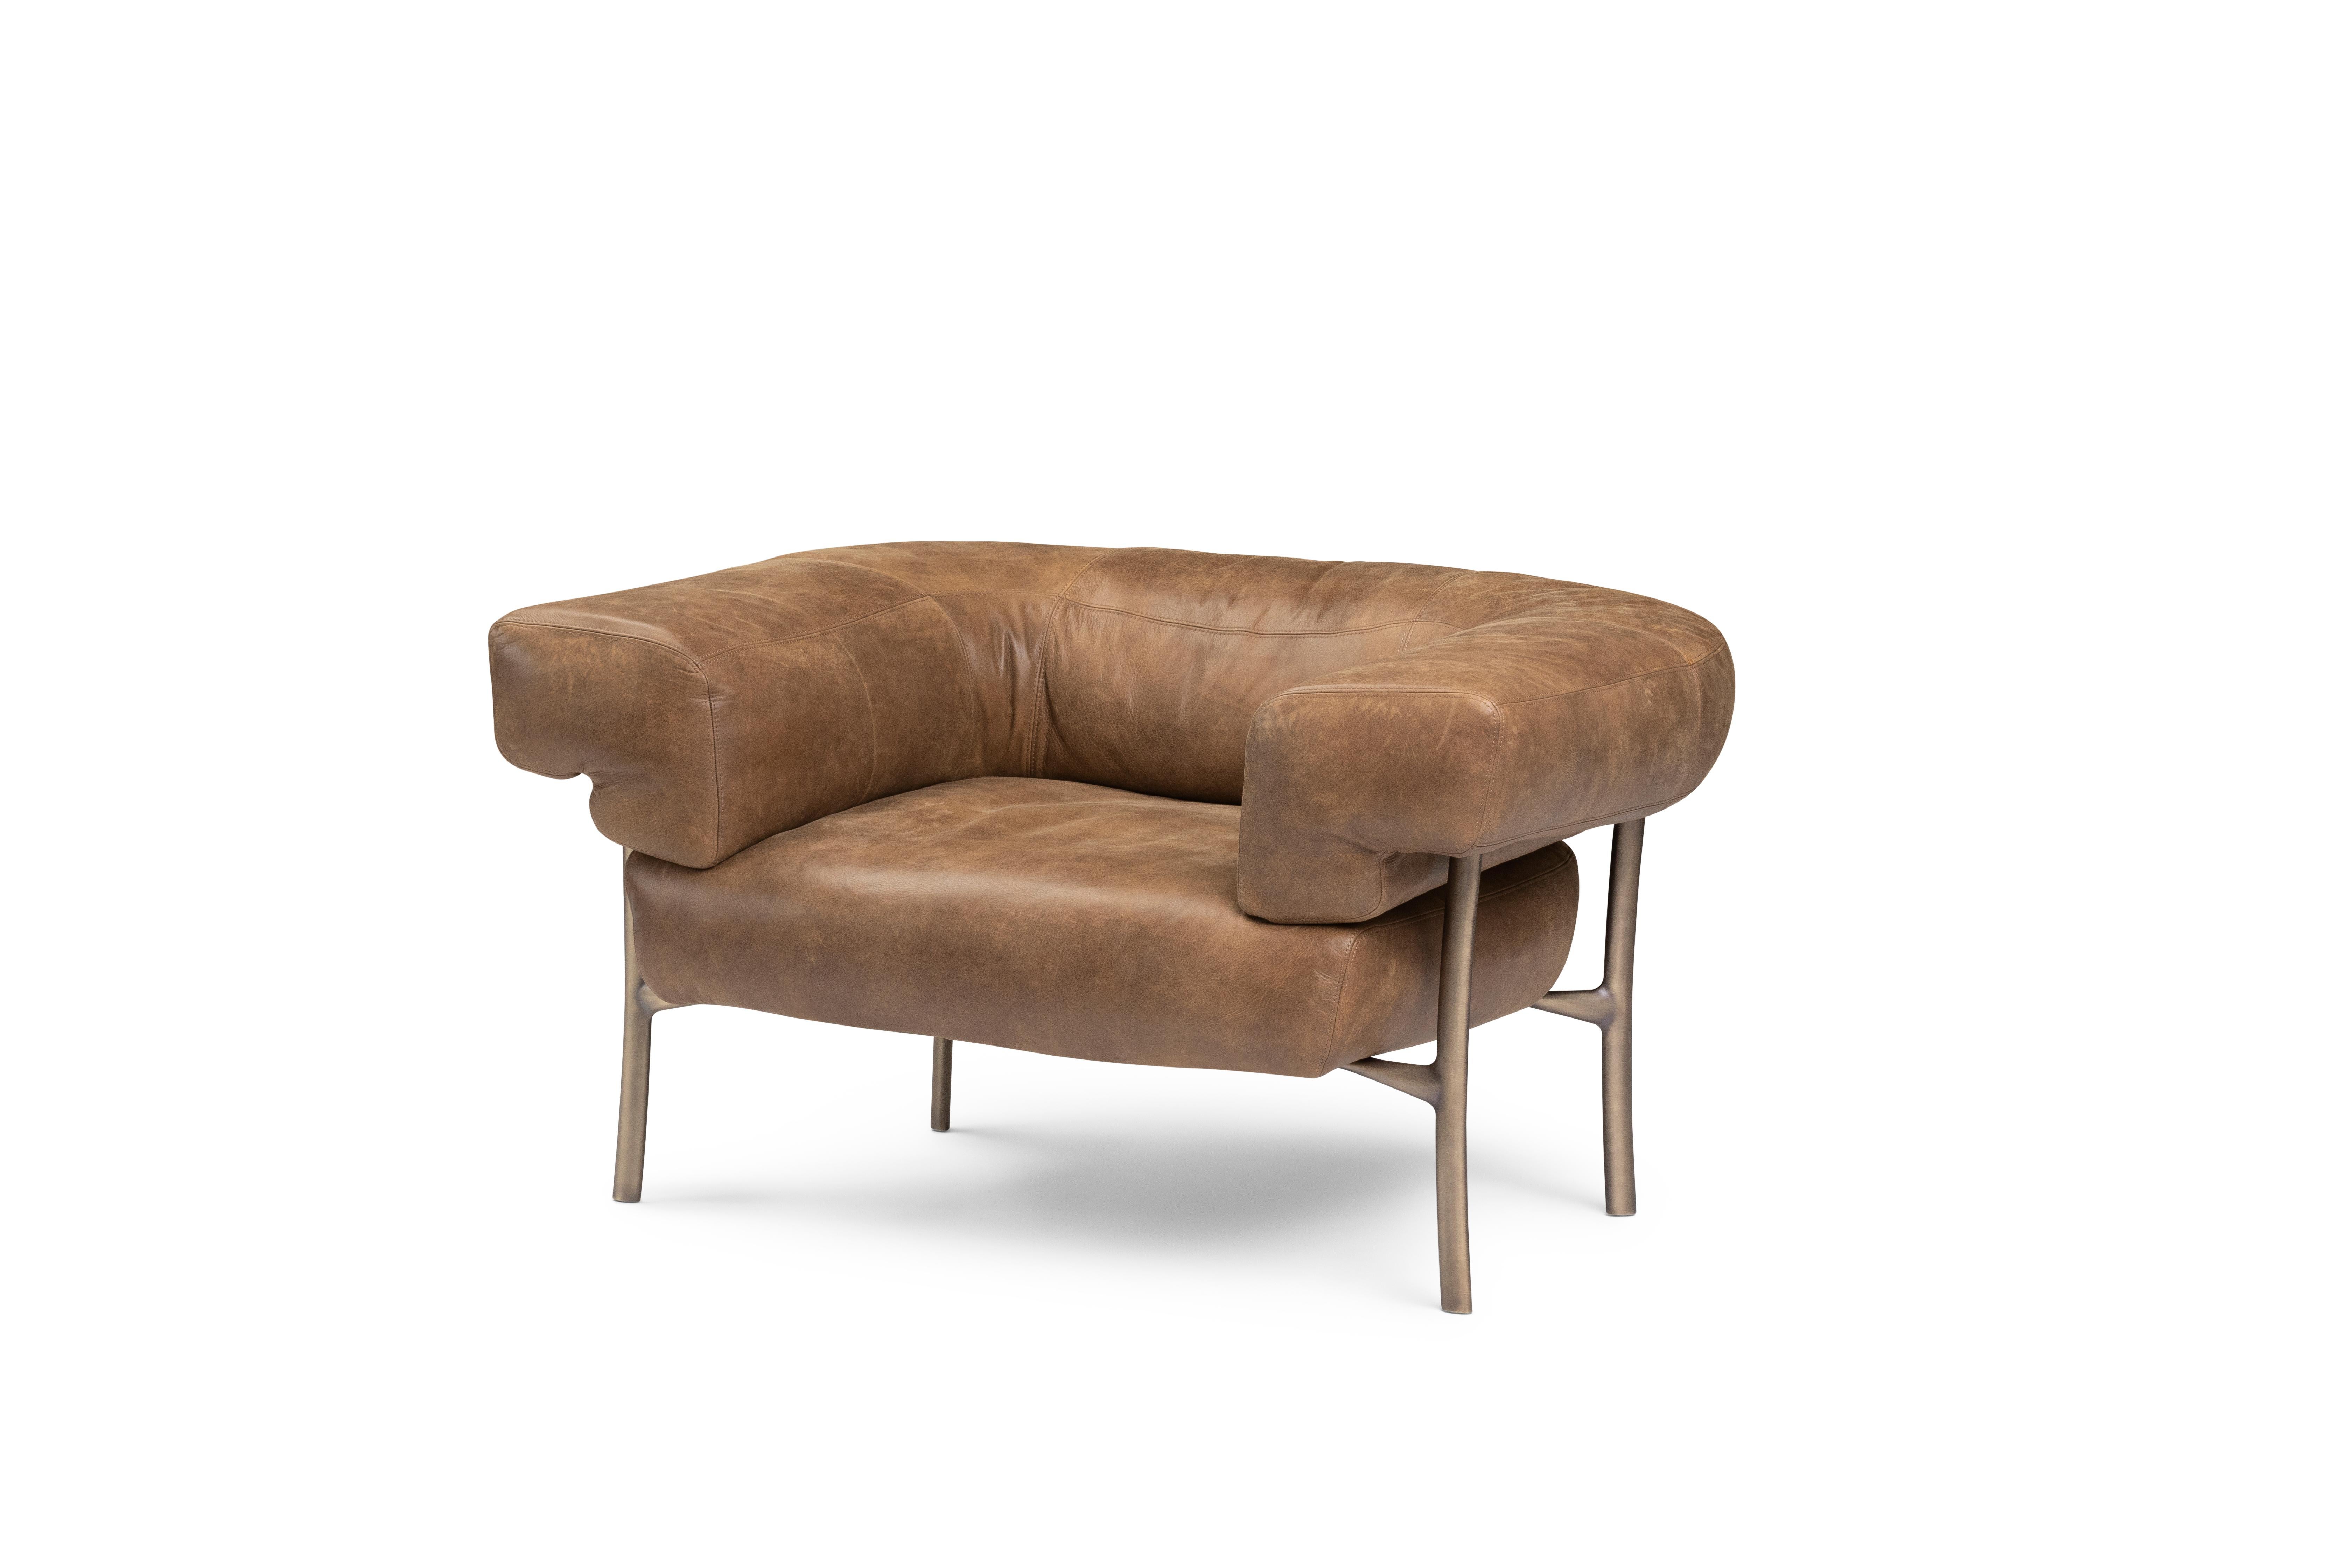 Contemporary Ghidini 1961 Katana Lounge Chair in Leather and Burnished Brass, Paolo Rizzatto For Sale